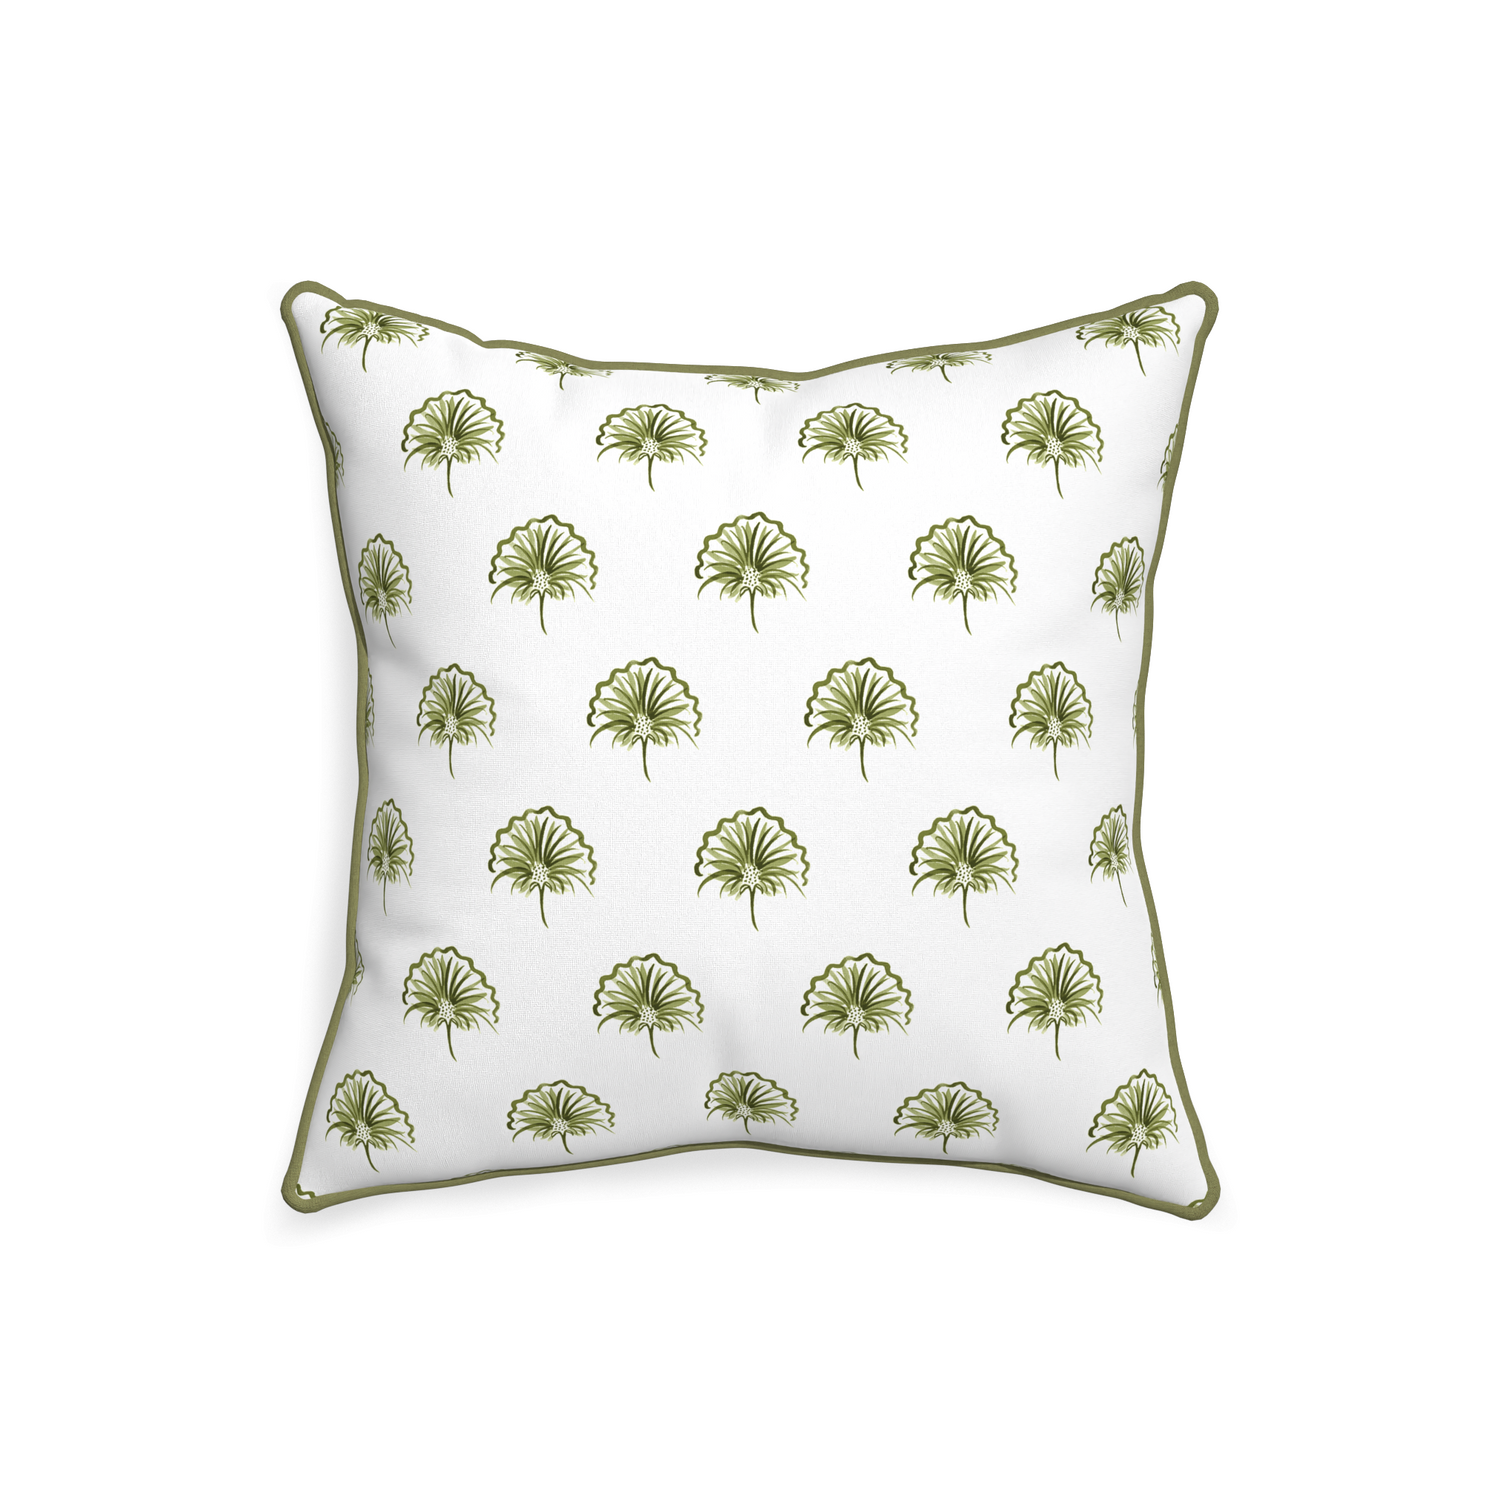 20-square penelope moss custom green floralpillow with moss piping on white background